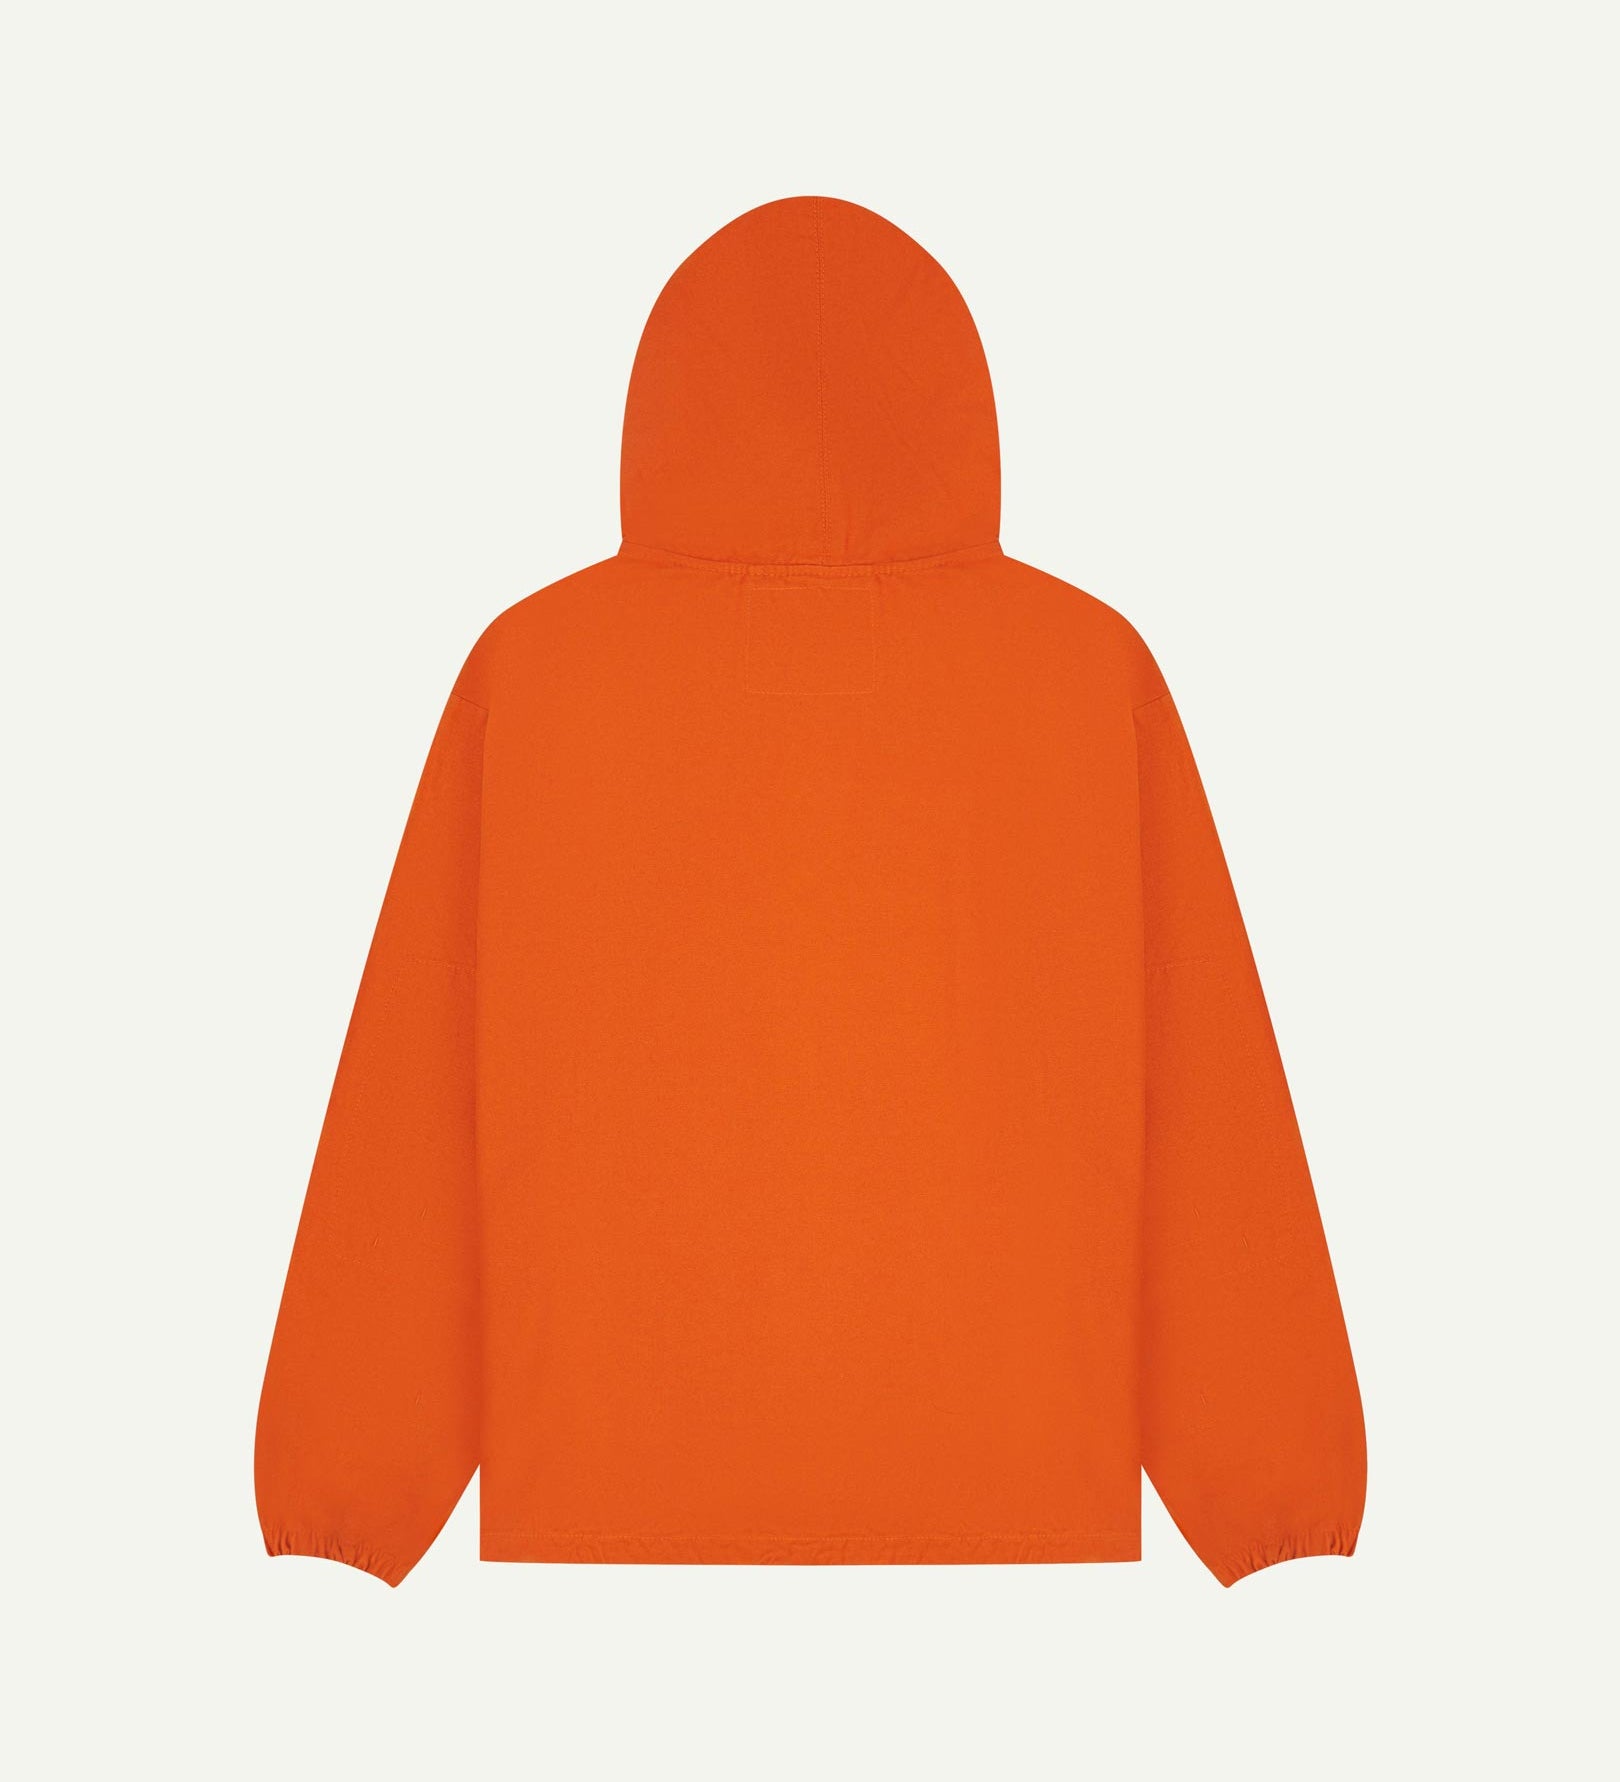 Back flat shot of Uskees gold-orange organic cotton smock showing reinforced elbows, back of hood and loose silhouette.